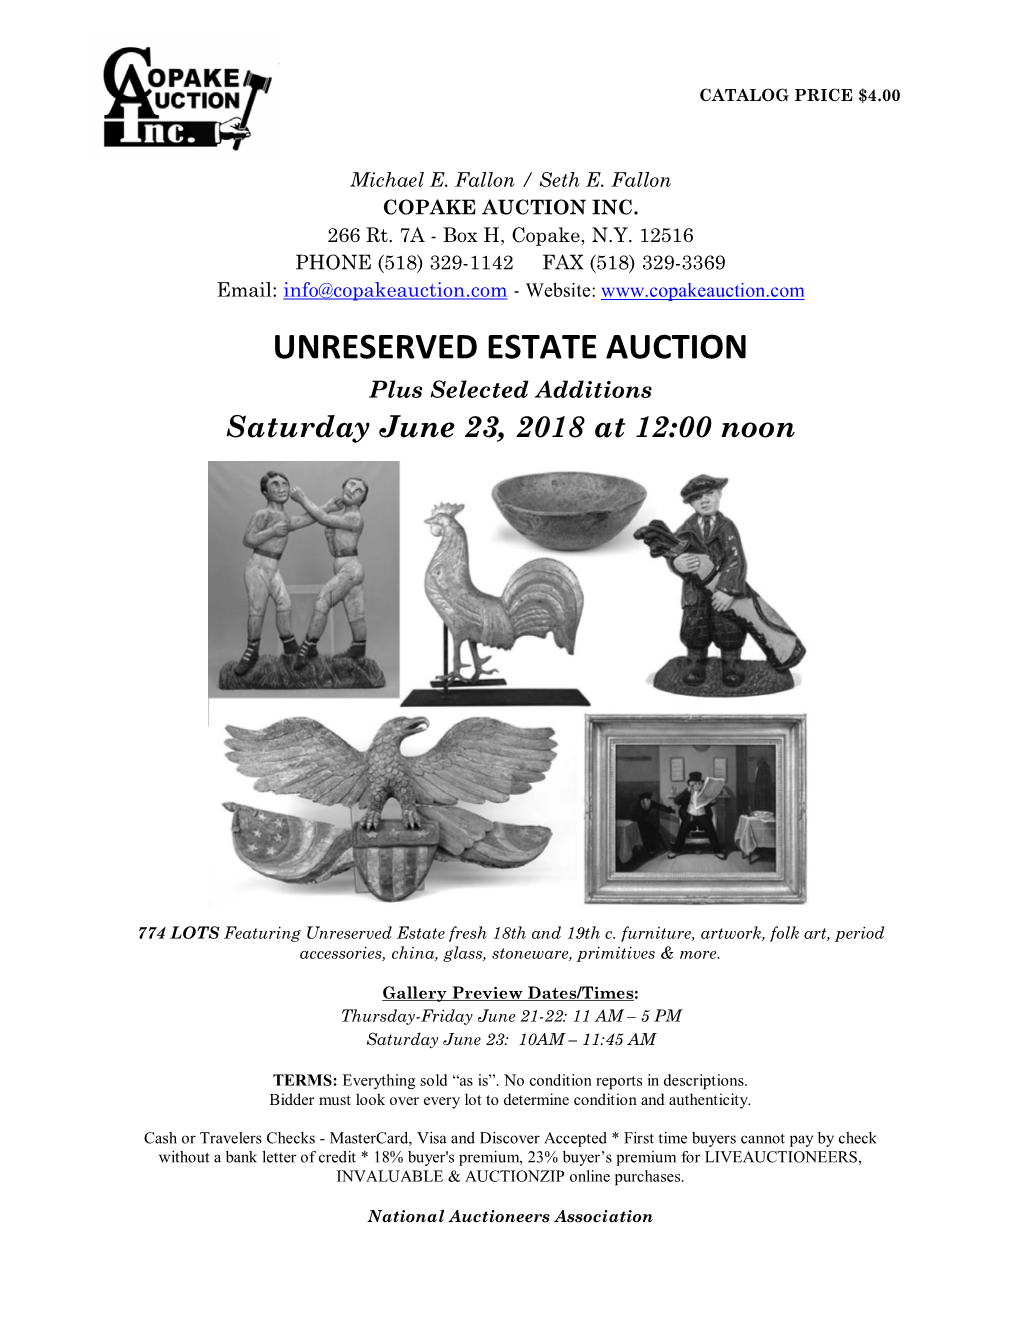 UNRESERVED ESTATE AUCTION Plus Selected Additions Saturday June 23, 2018 at 12:00 Noon